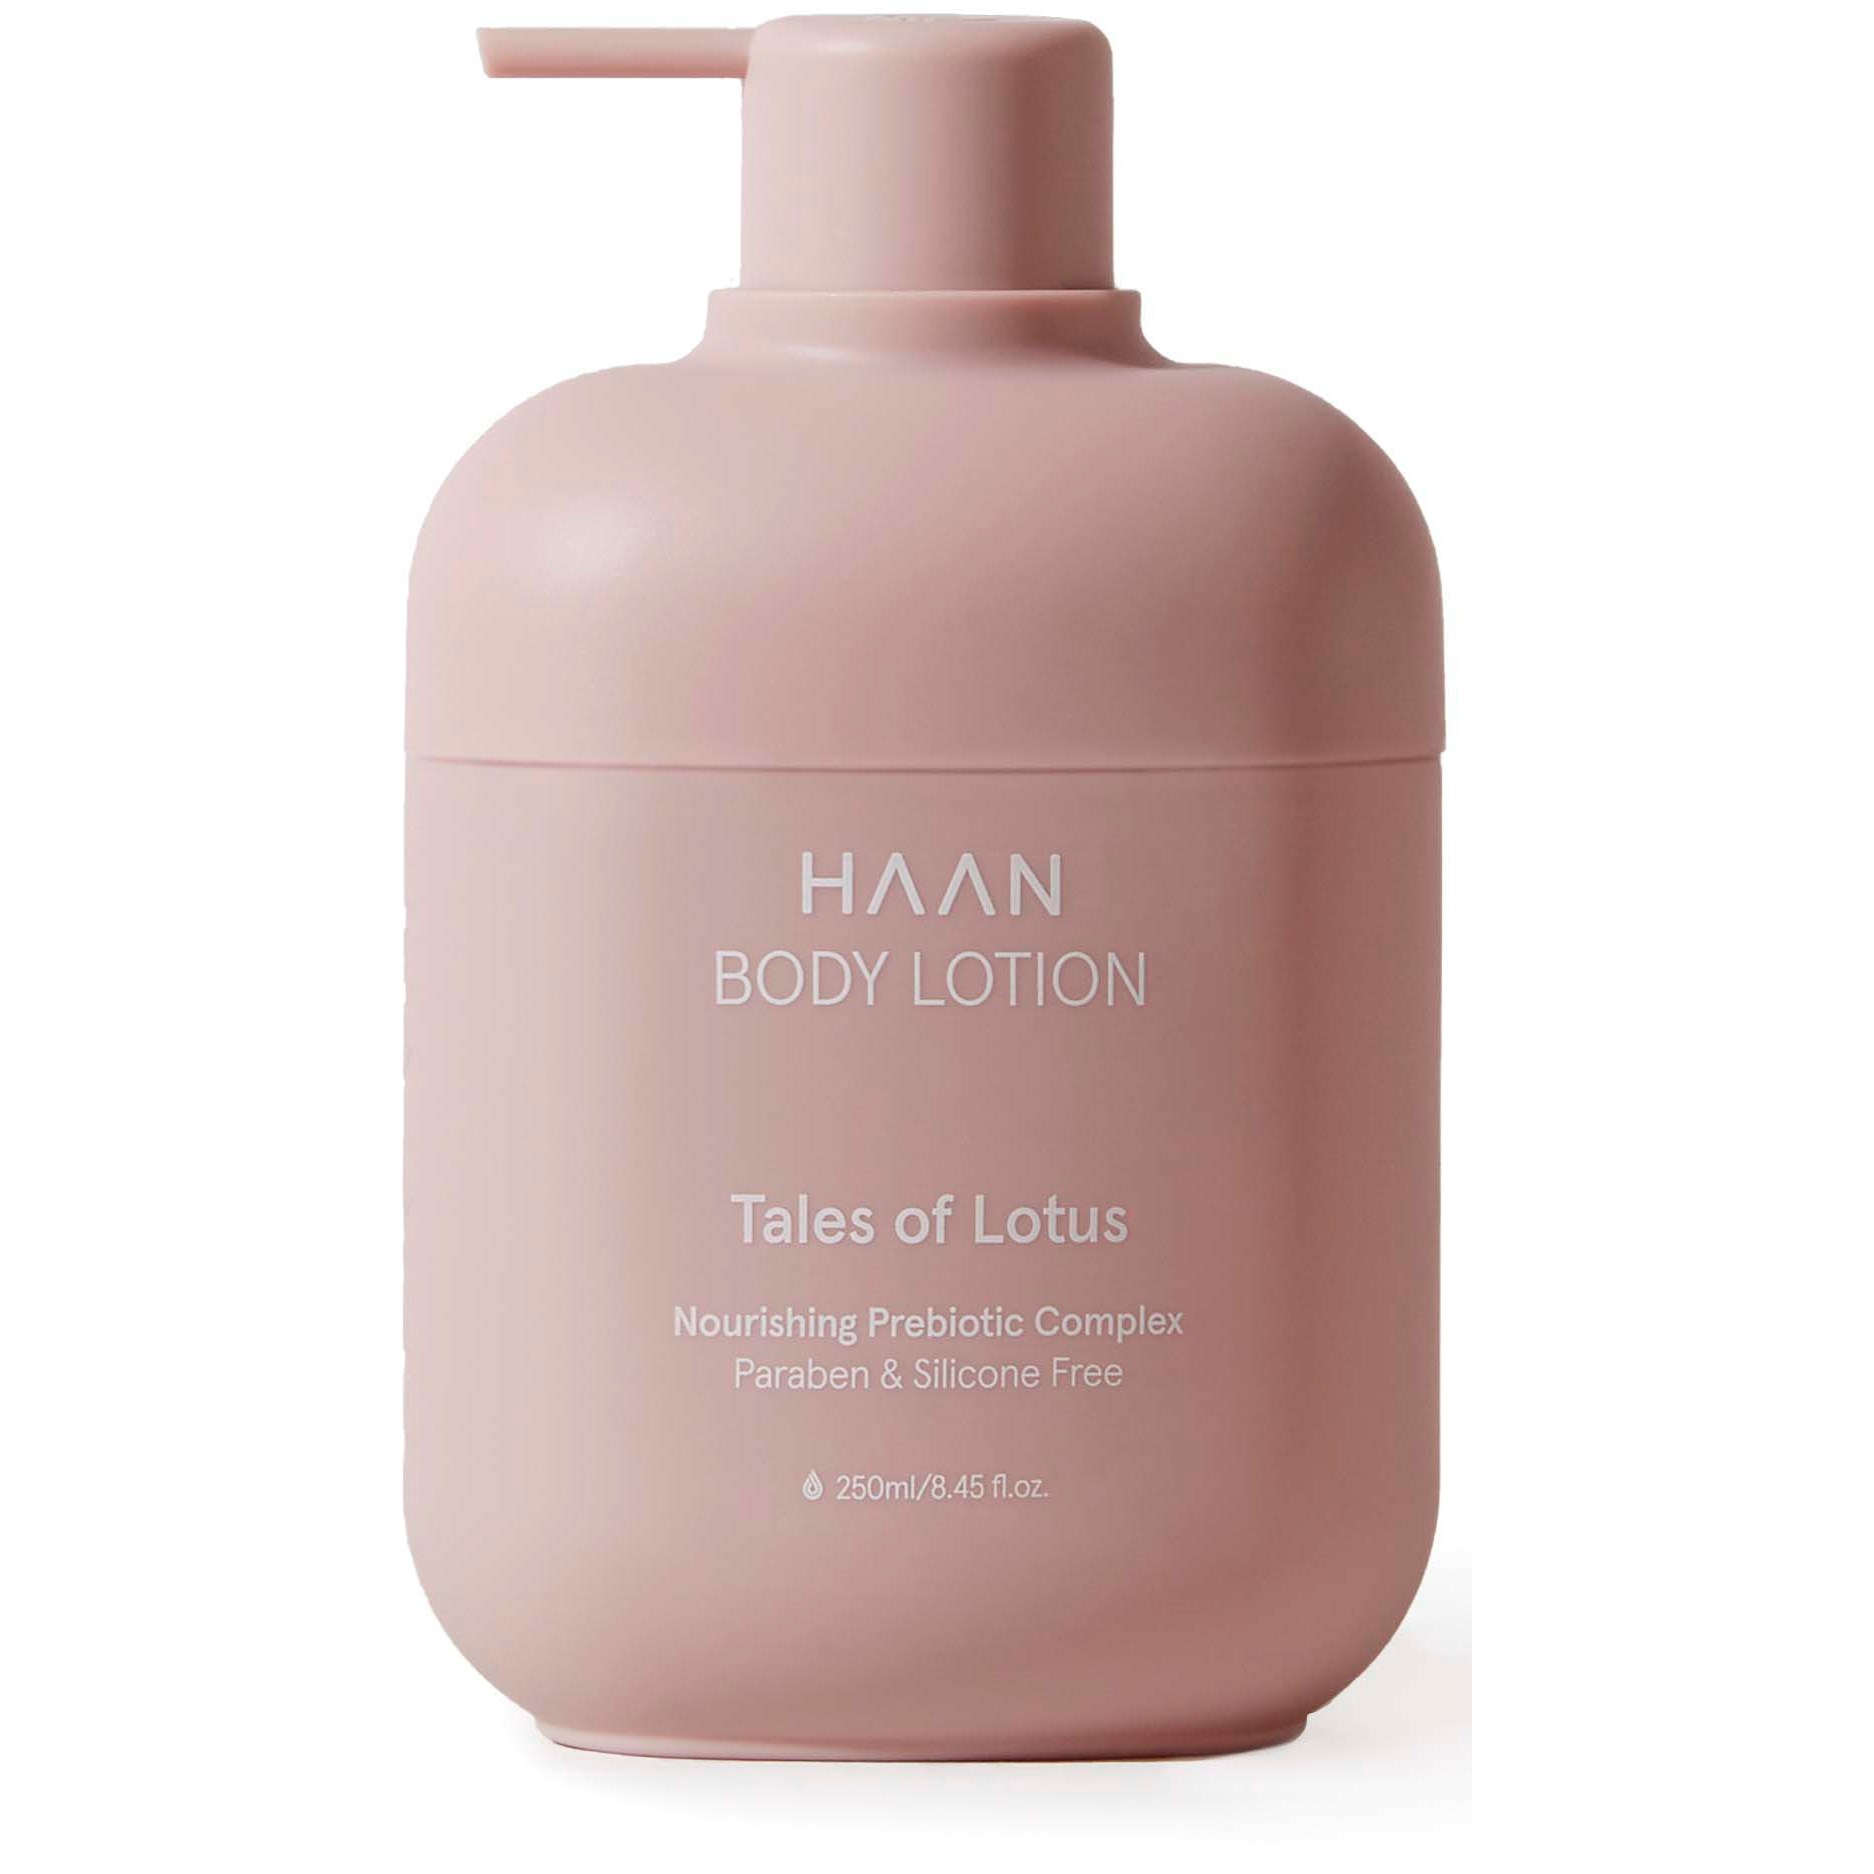 HAAN Body Lotion Tales Of Lotus Body Lotion  250 ml